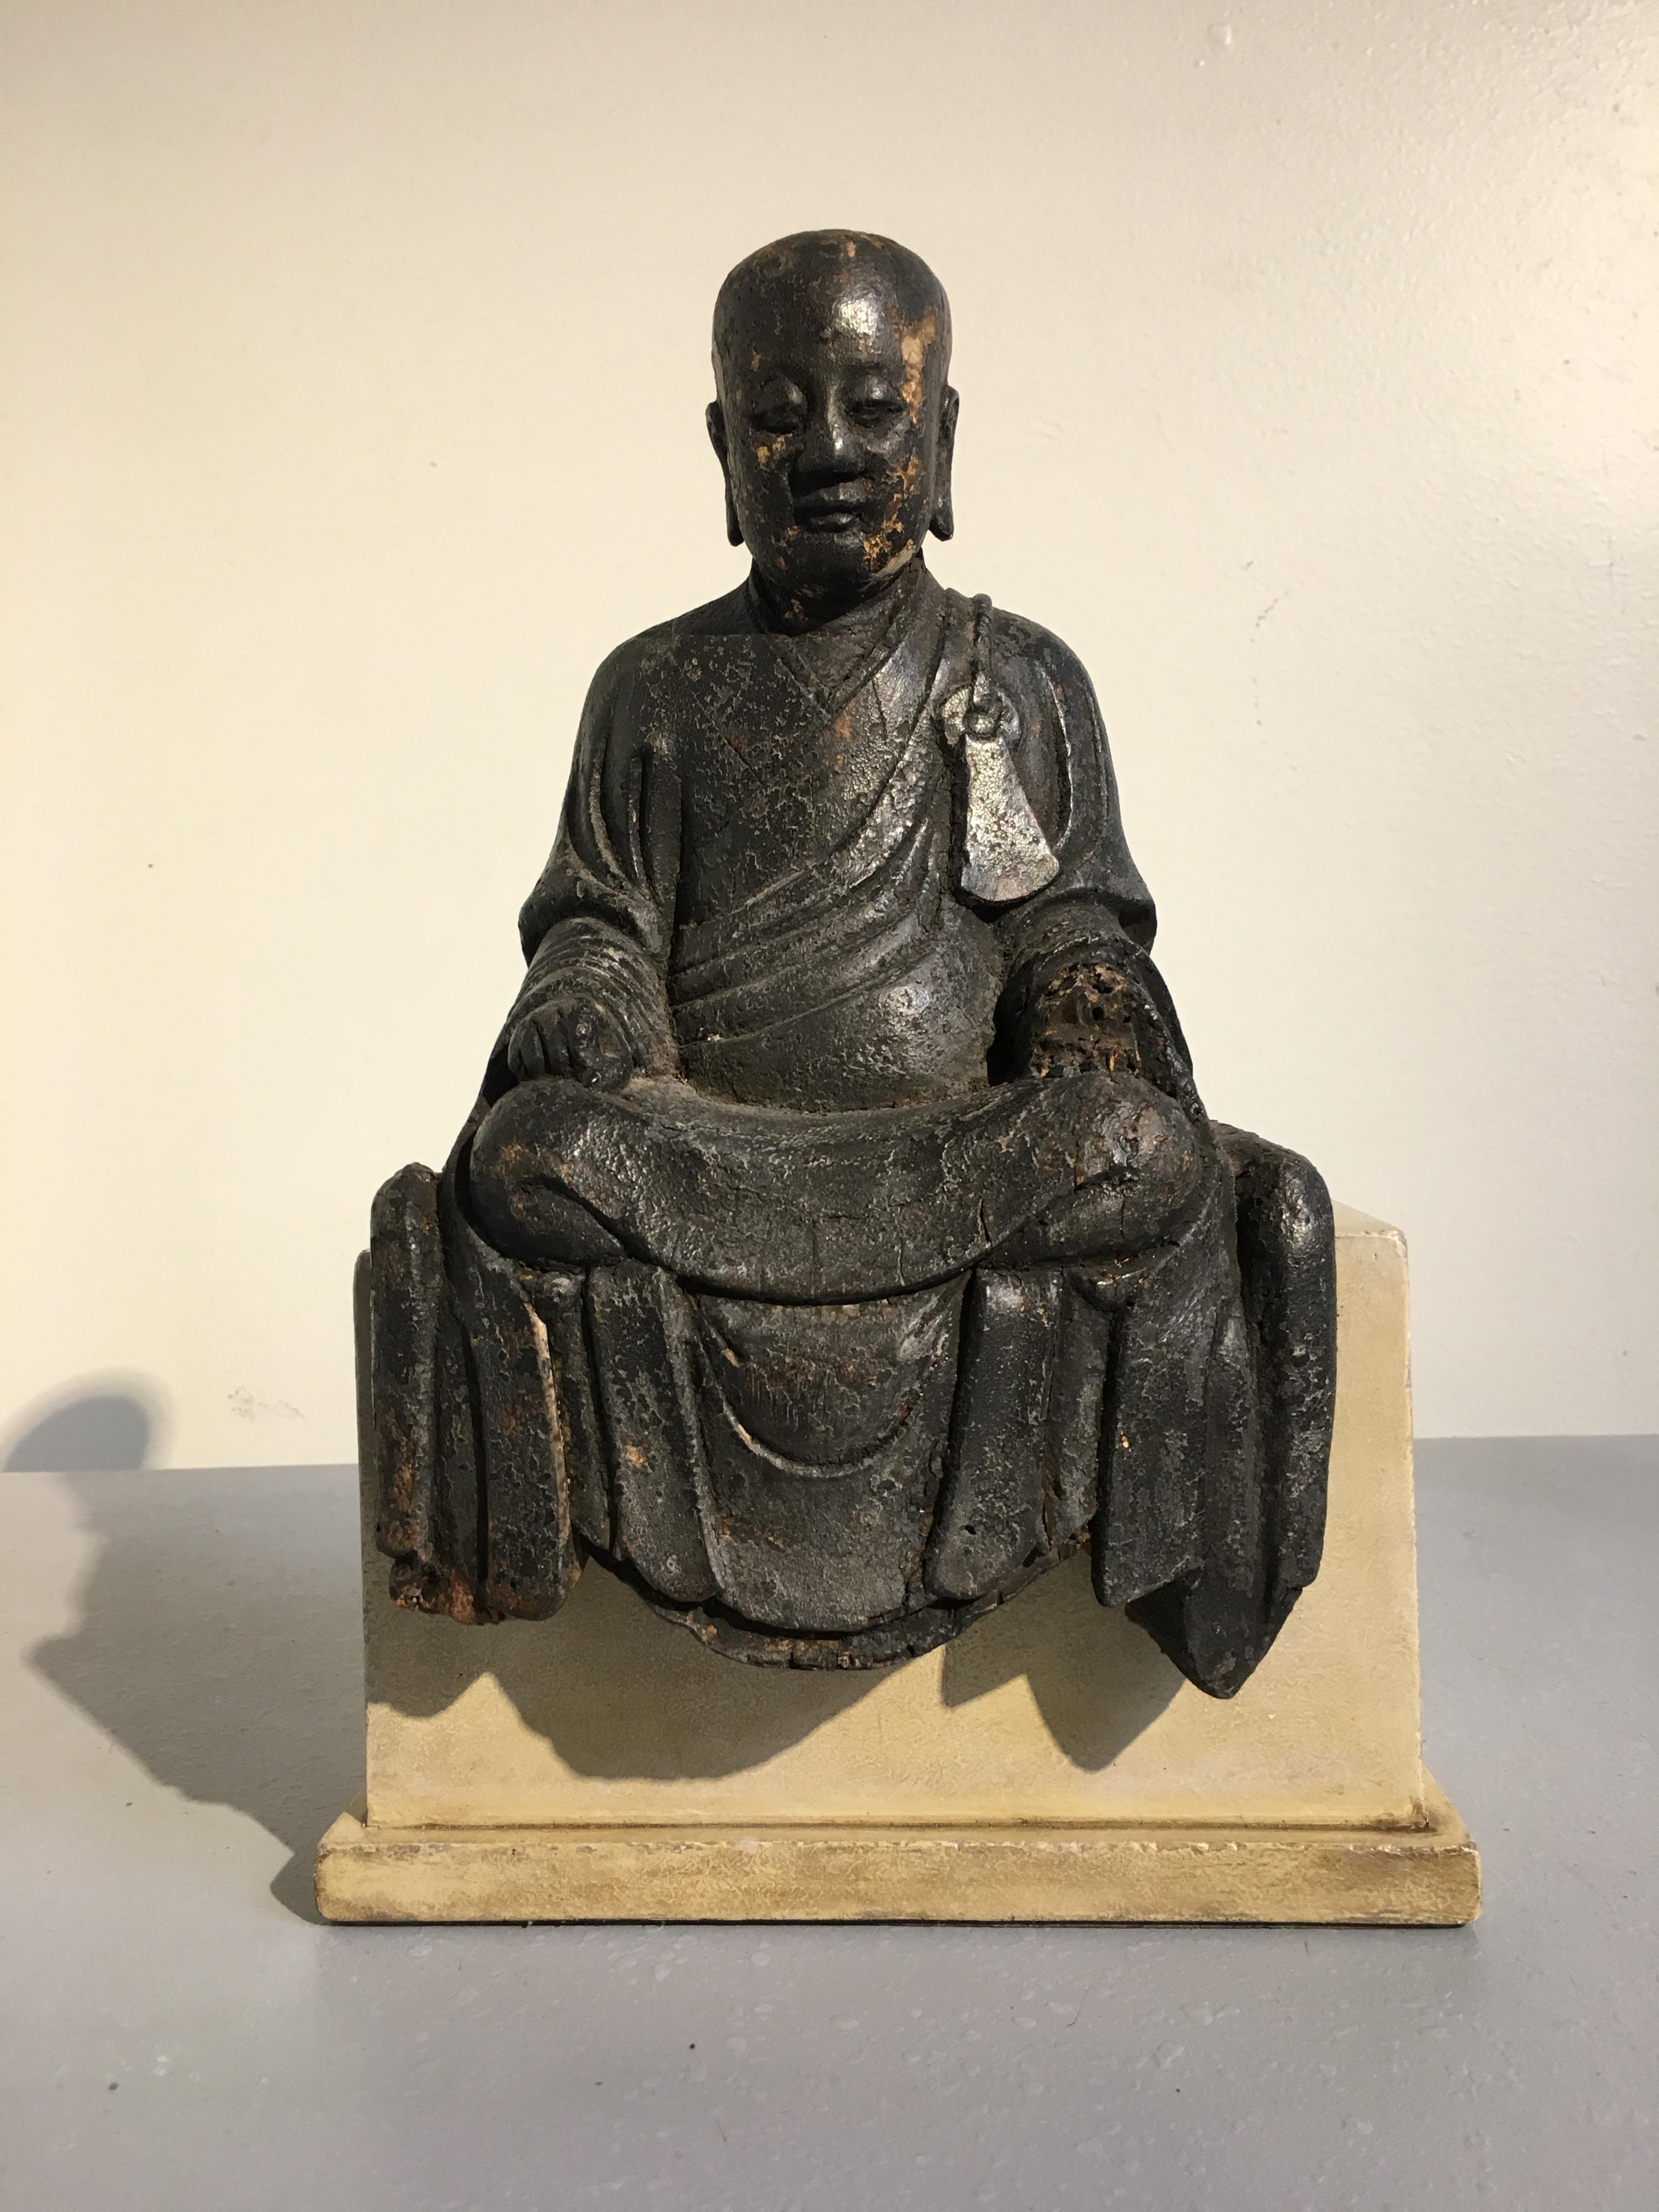 A serene and charming Chinese carved and lacquered wooden figure of an Arhat or Luohan, late Ming dynasty, circa 1600.
The noble figure depicts and elderly disciple of the Buddha, known as a Luohan or Arhat. He is portrayed seated upon a platform